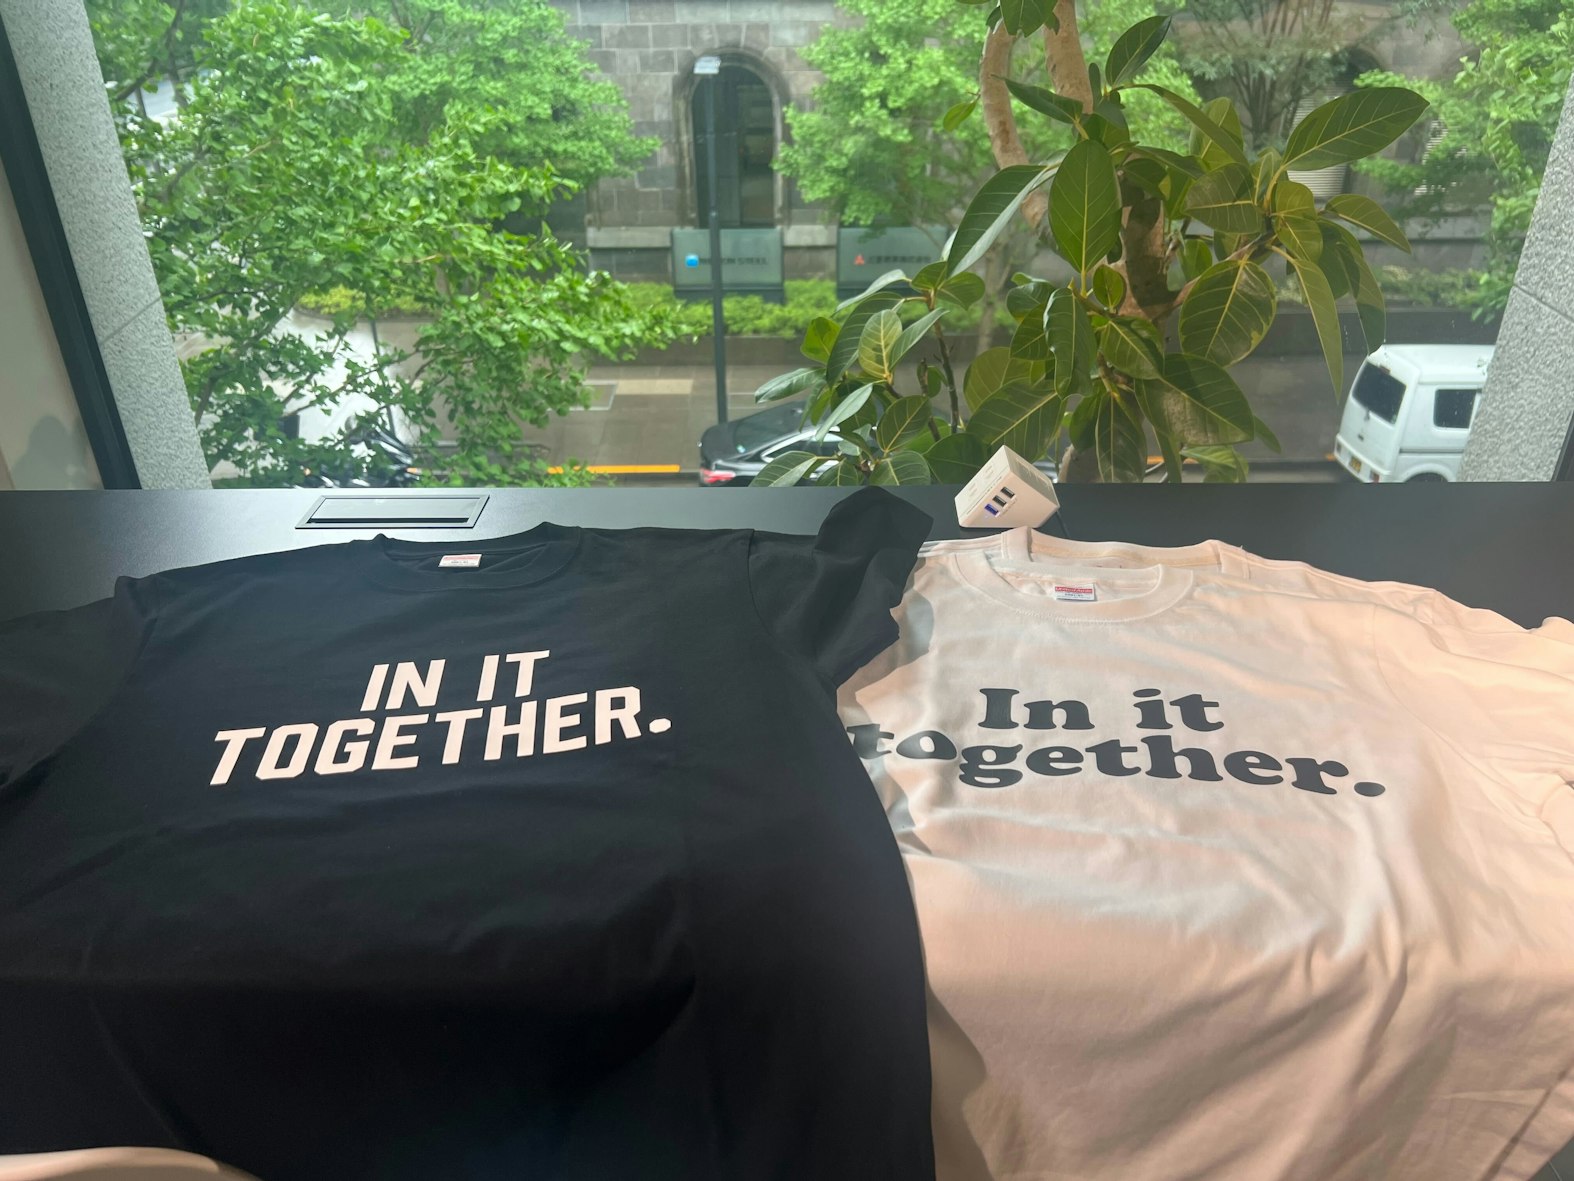 In it together. No matter what（渦中の友を助ける）のTシャツ